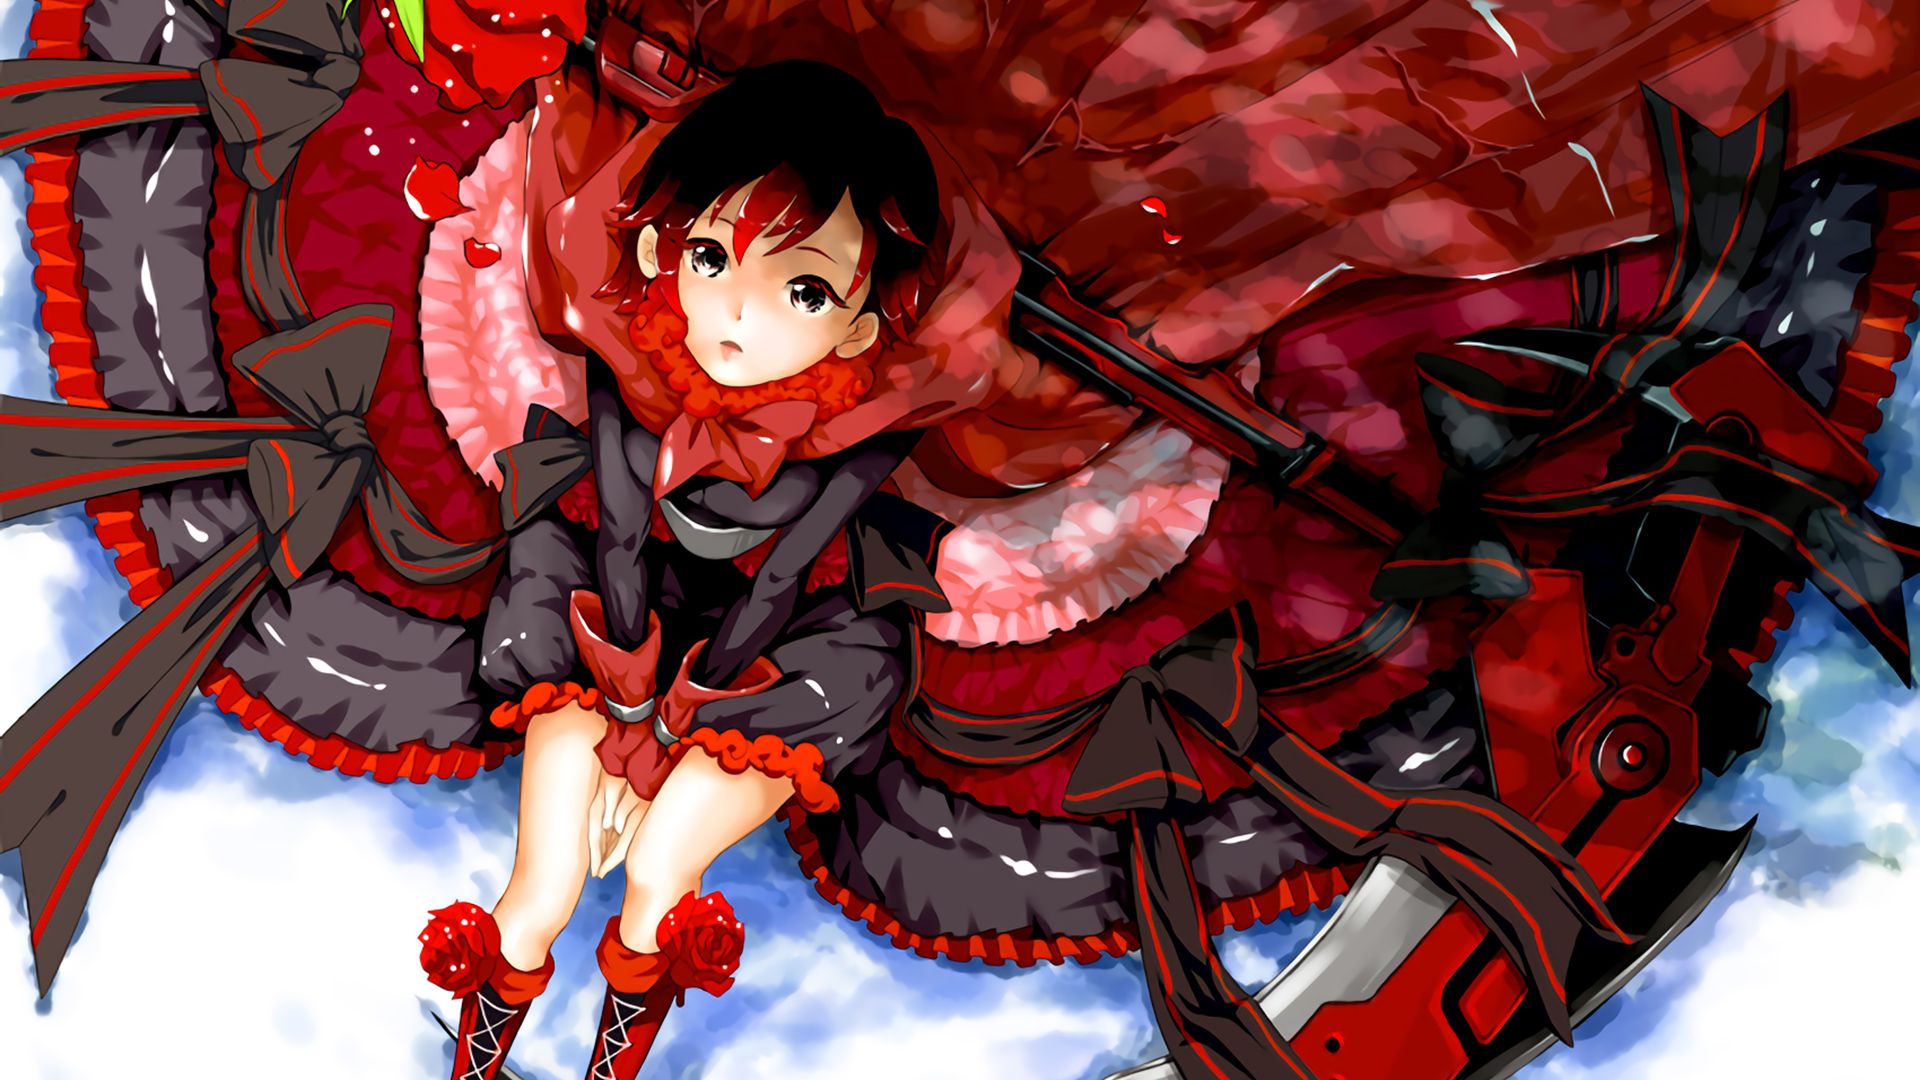 Desktop Wallpaper Ruby Rose Anime Girl Rwby Looking Up Hd Image Picture Background 7941d9